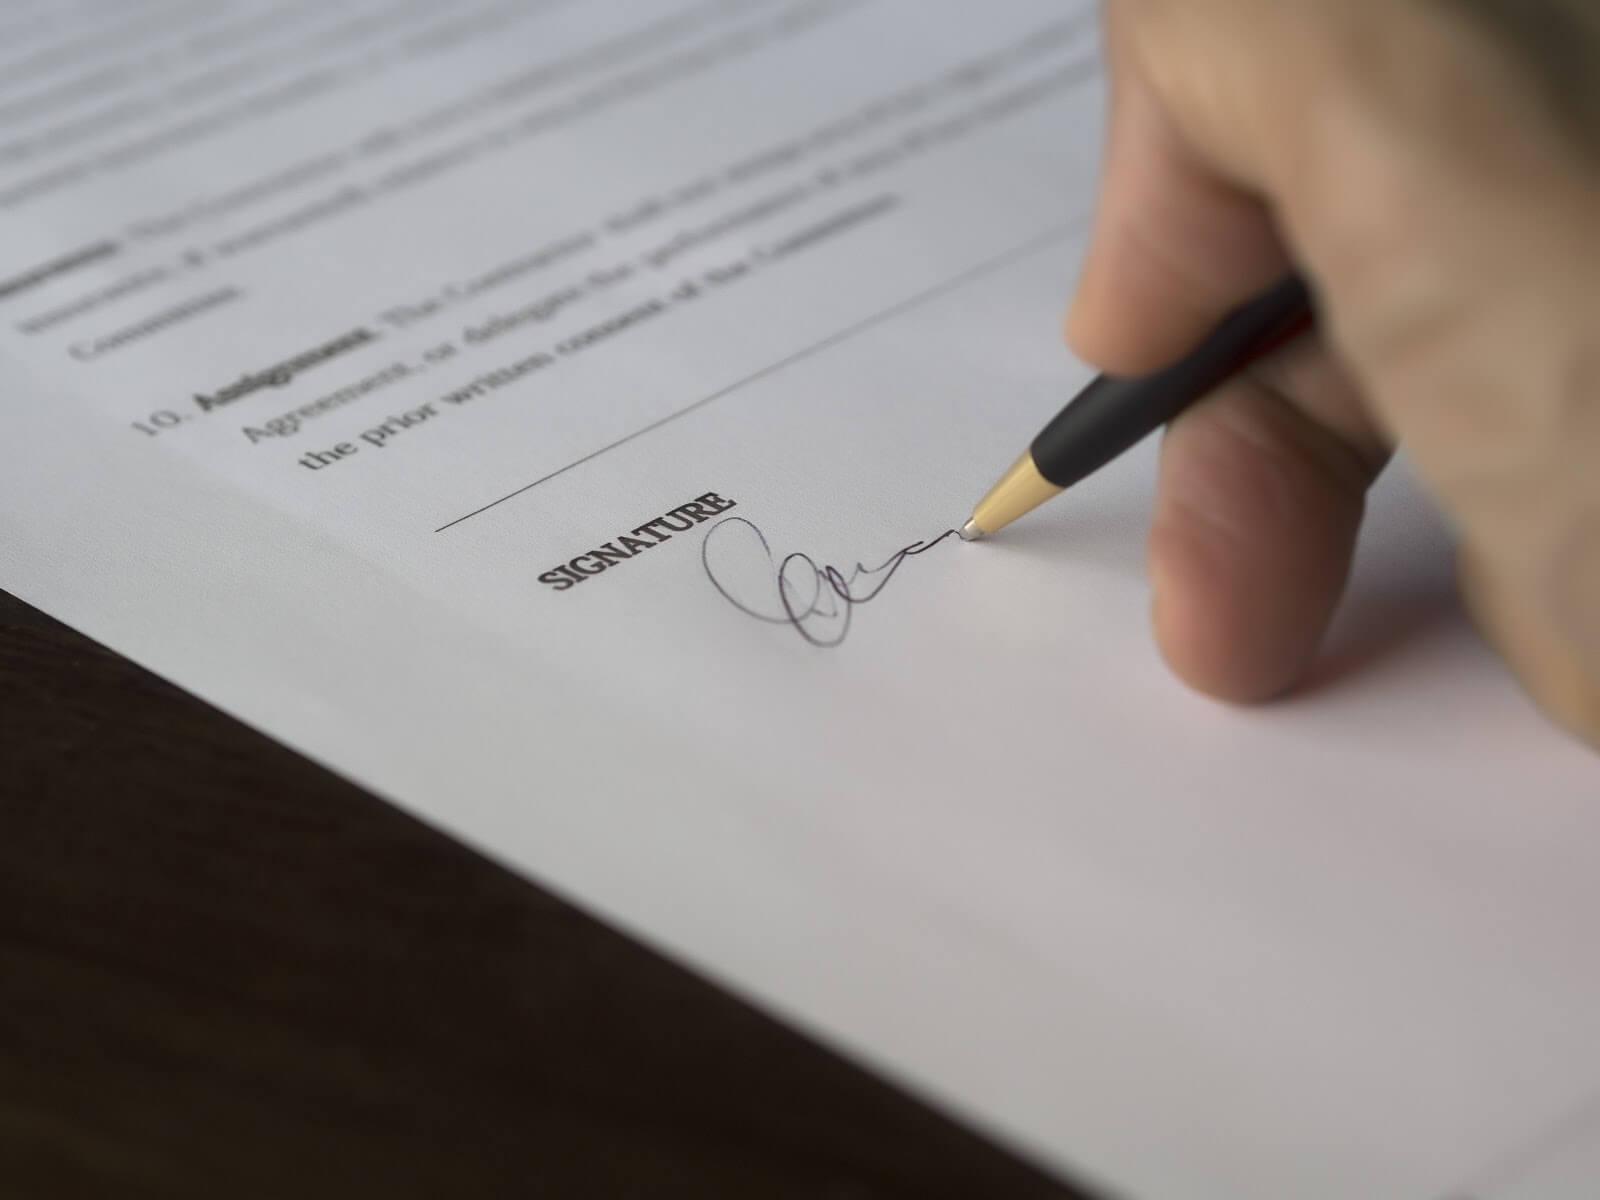 Non-compete agreement: A hand signs a contract